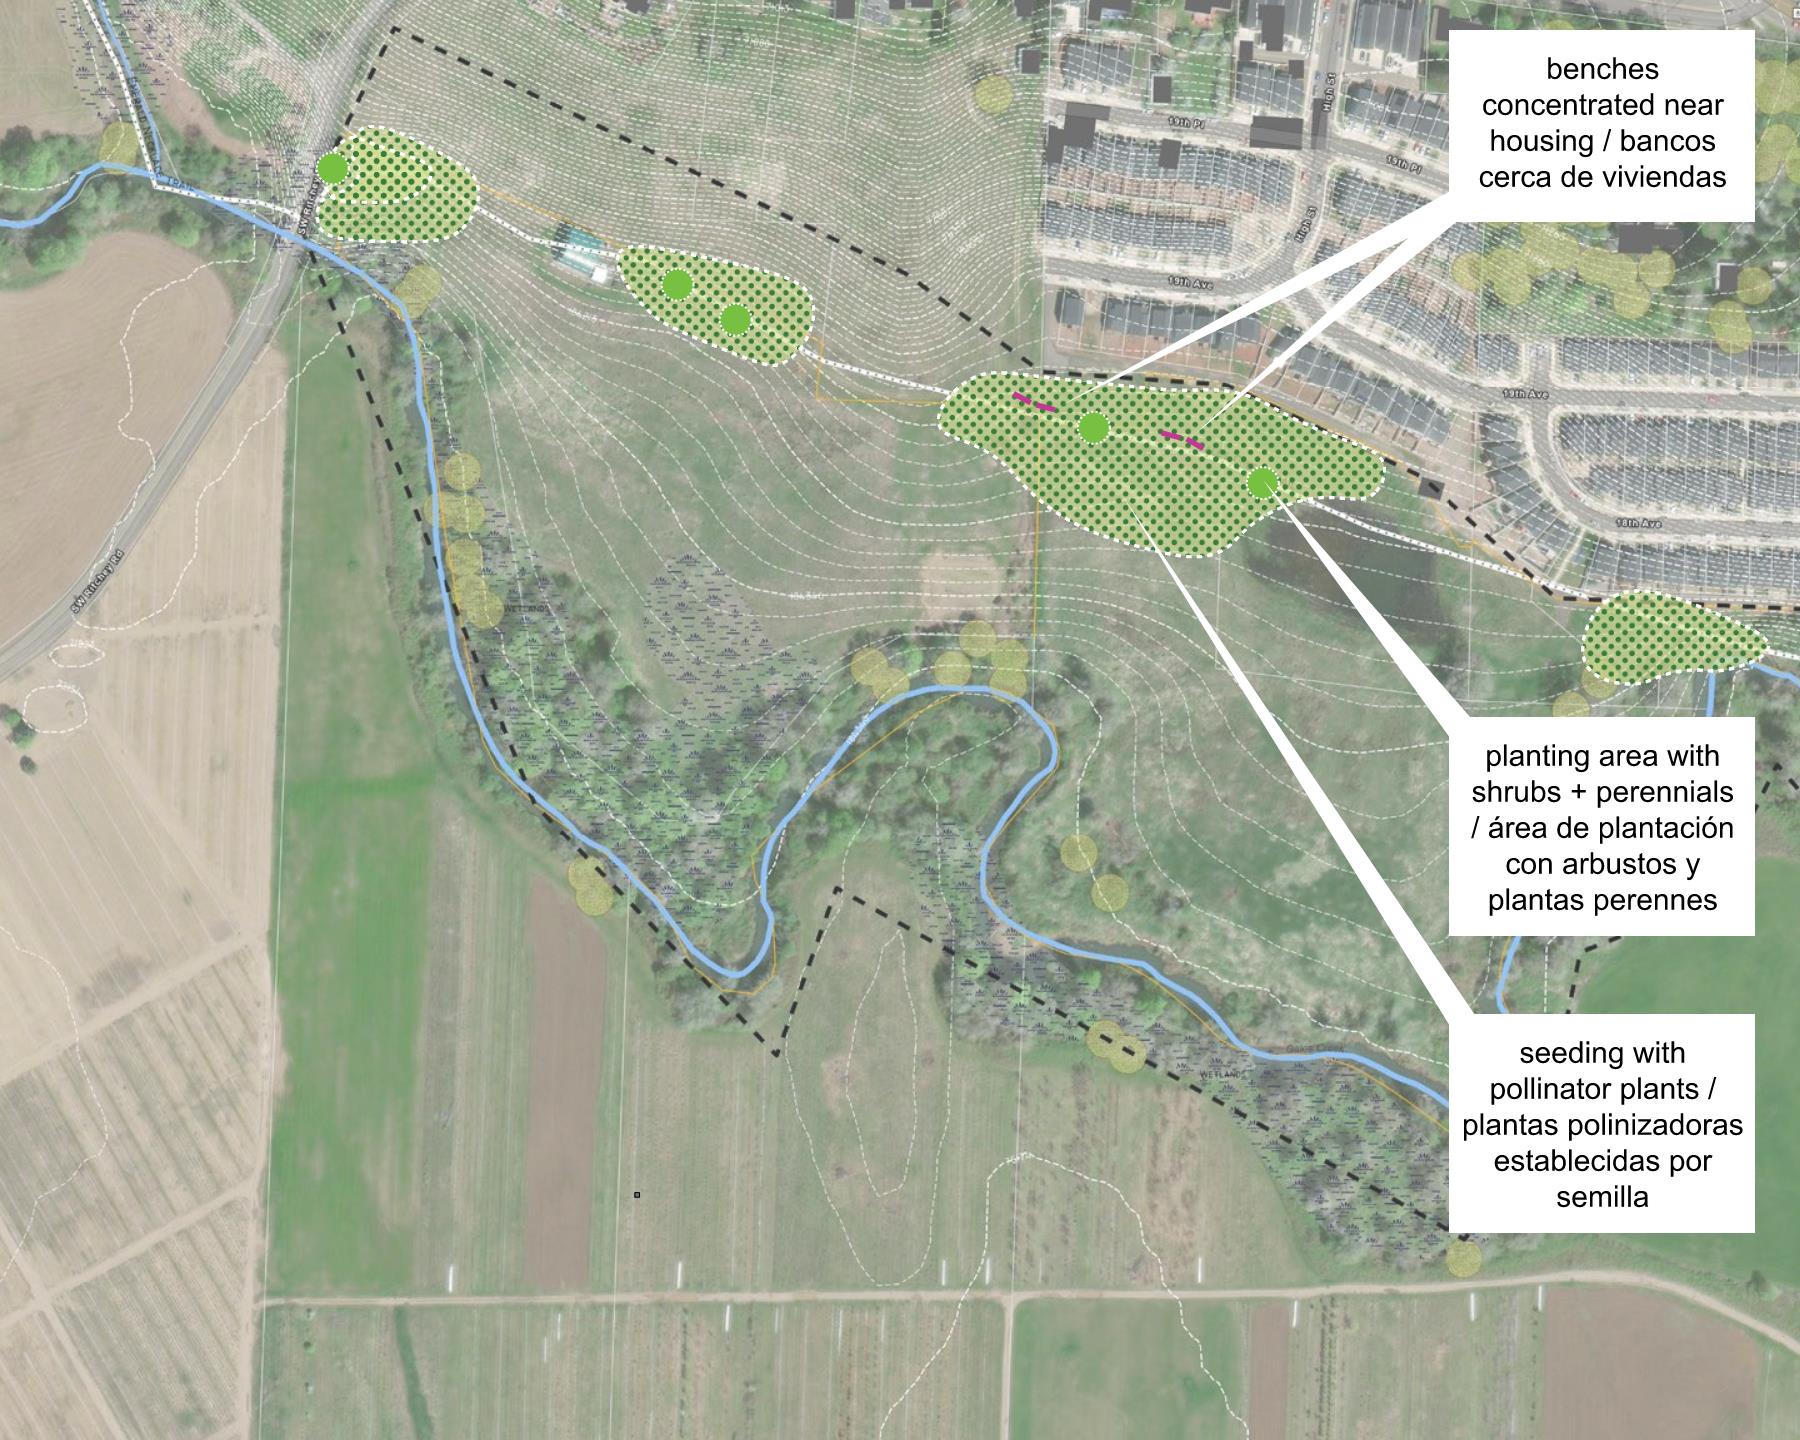 Image alt text: Pollinator planting and benches are proposed along the southern part of Forest Grove Loop Trail to the east of south west Ritchey Road. Gale Creek winds along the south of the trail and residential neighborhoods are to the north. New patches of seeding with pollinator plants will host planting areas of shrubs and perennials. In the patch concentrated closest to the residential area, benches will be provided along the trail, encouraging residents to come be in nature.